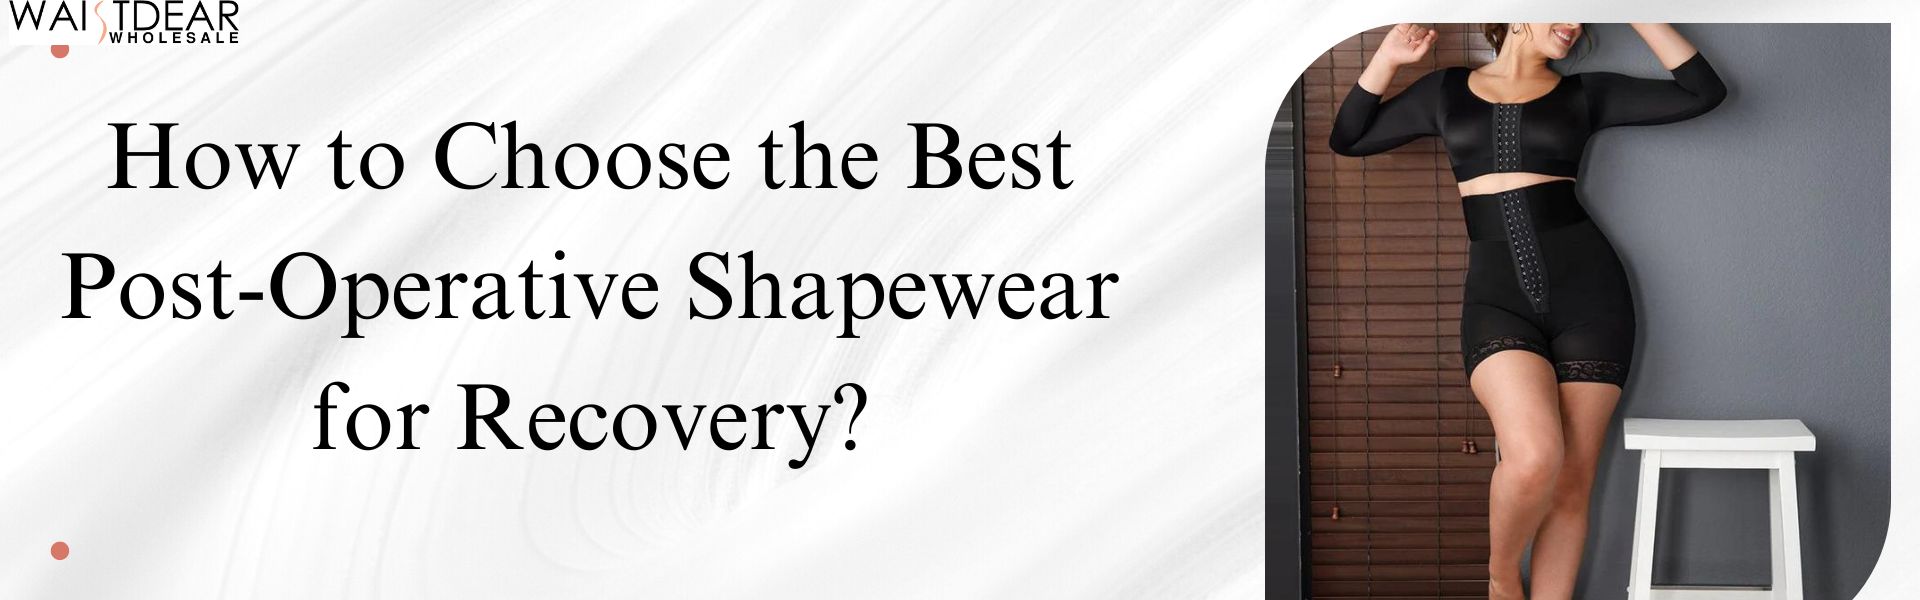 How to Choose the Best Post-Operative Shapewear for Recovery?